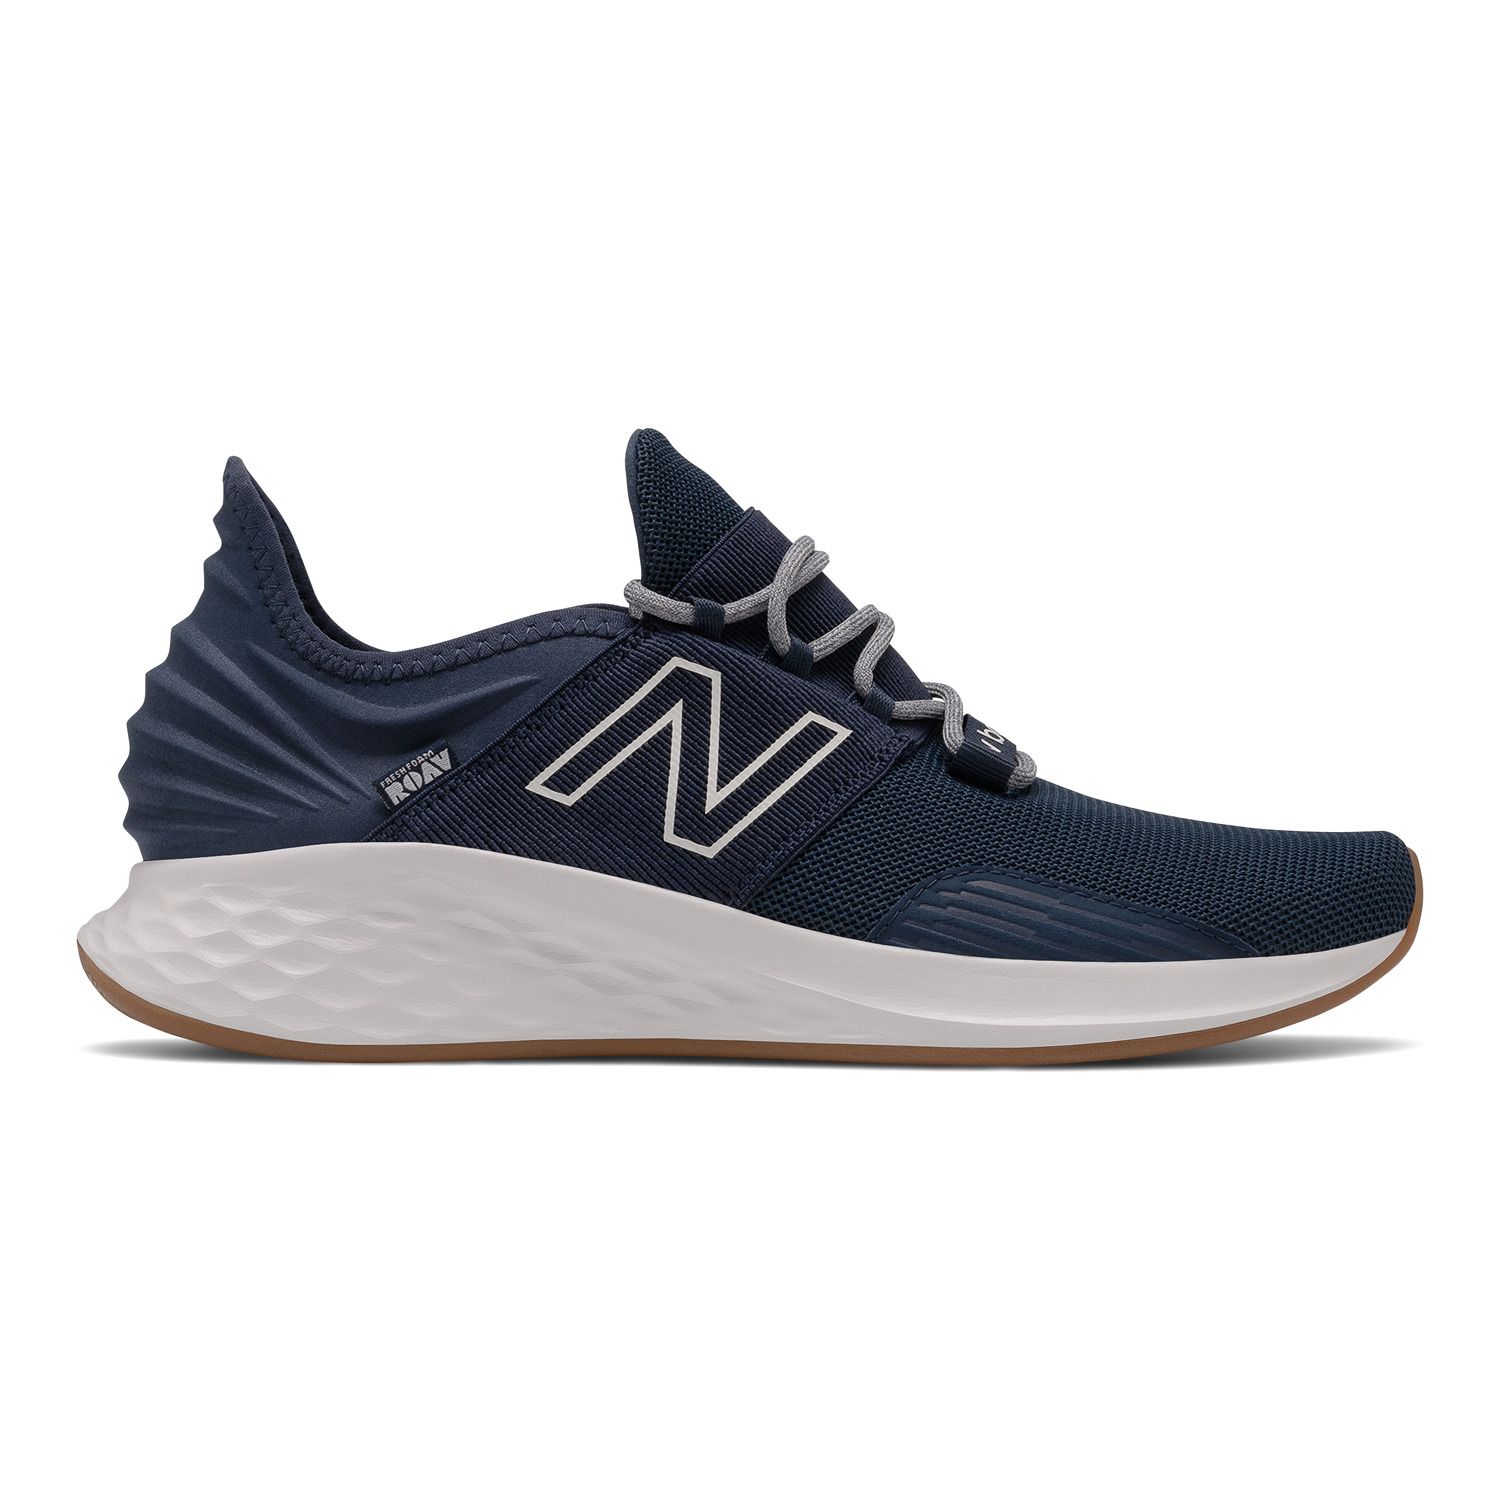 nb shoes for running